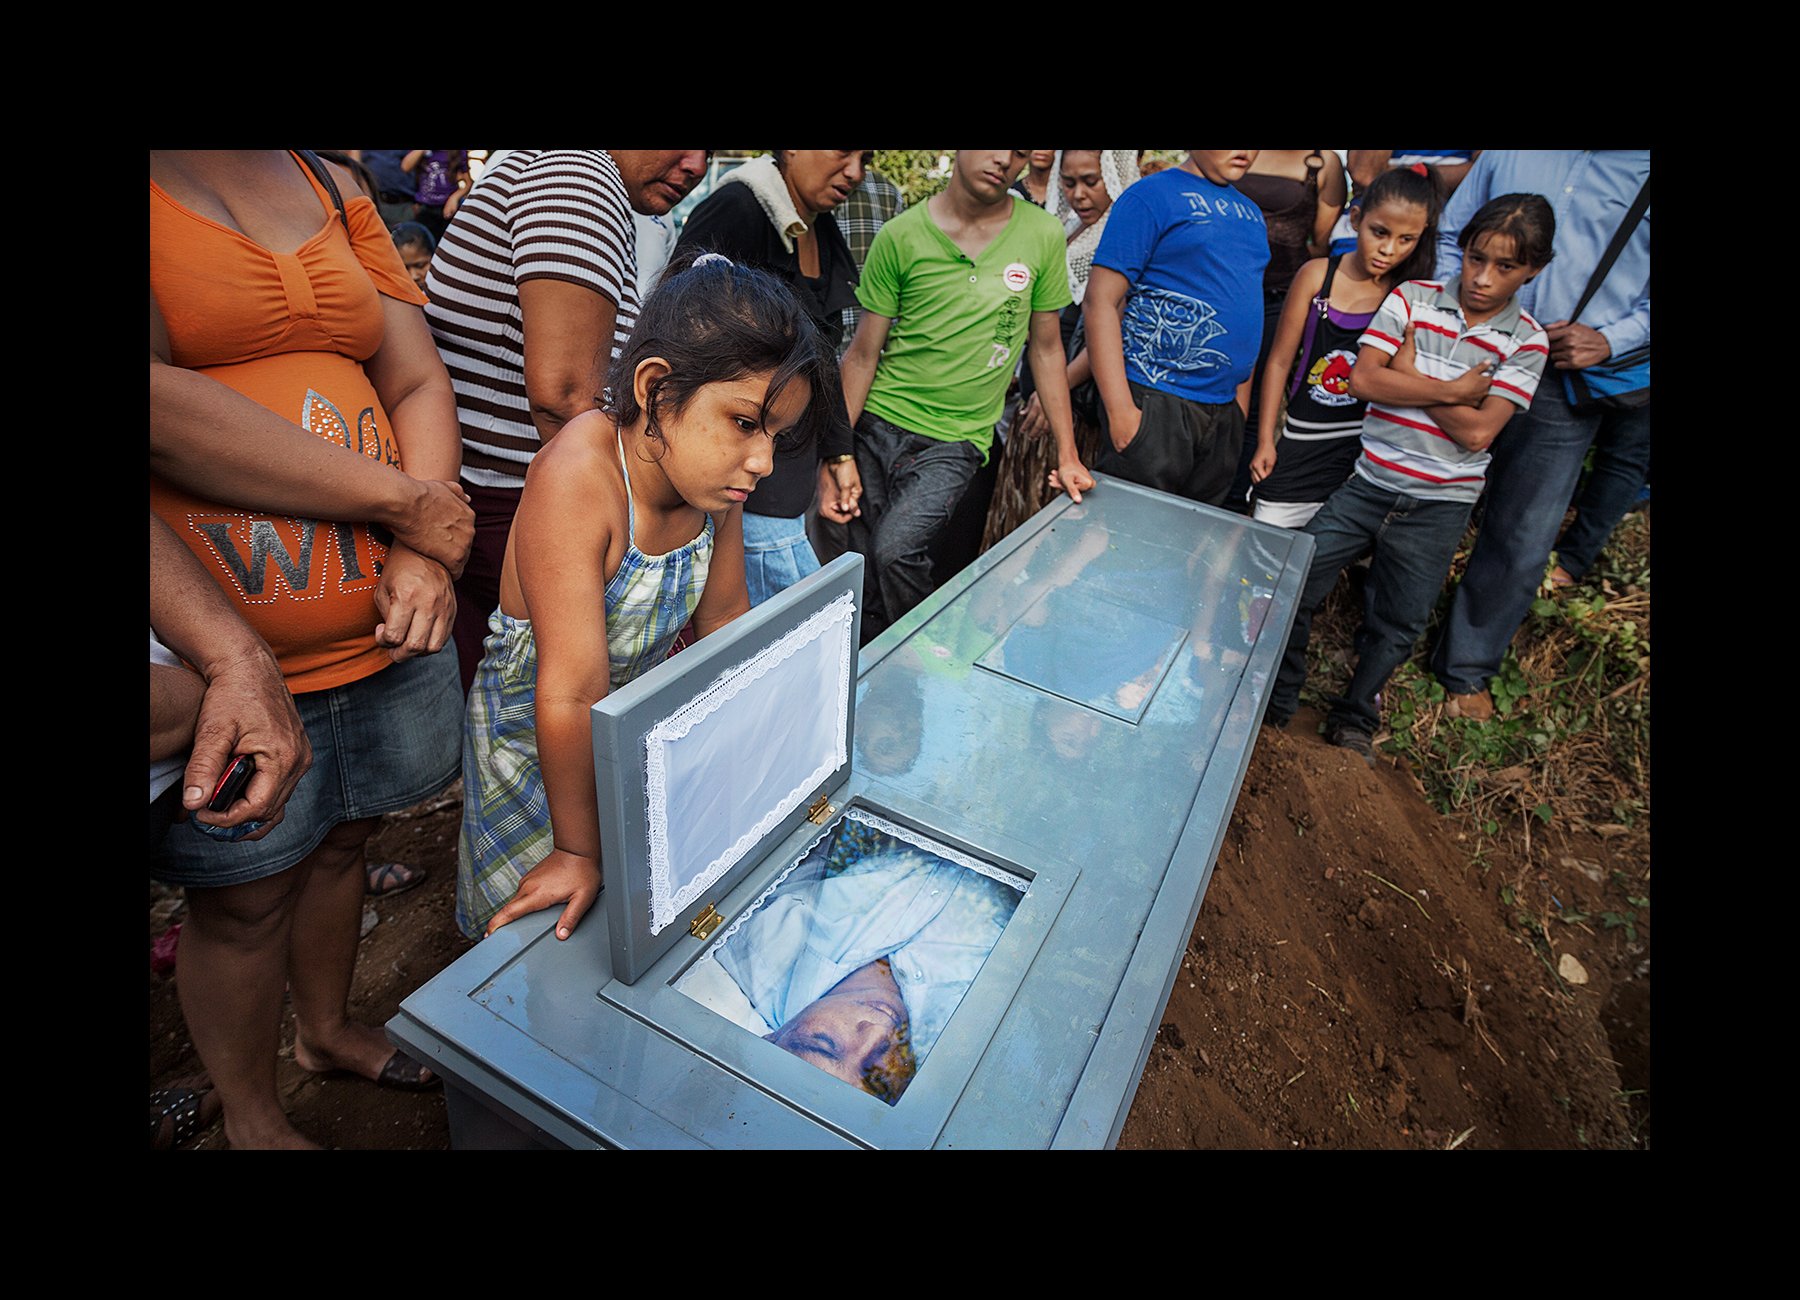  Family and friends gather for the funeral procession and burial of a former sugar cane worker, 36, who died of CKDnT, in Chichigalpa, Nicaragua on Jan. 7, 2013. After working in the sugar cane fields for 12 years, he is part of a steady procession o